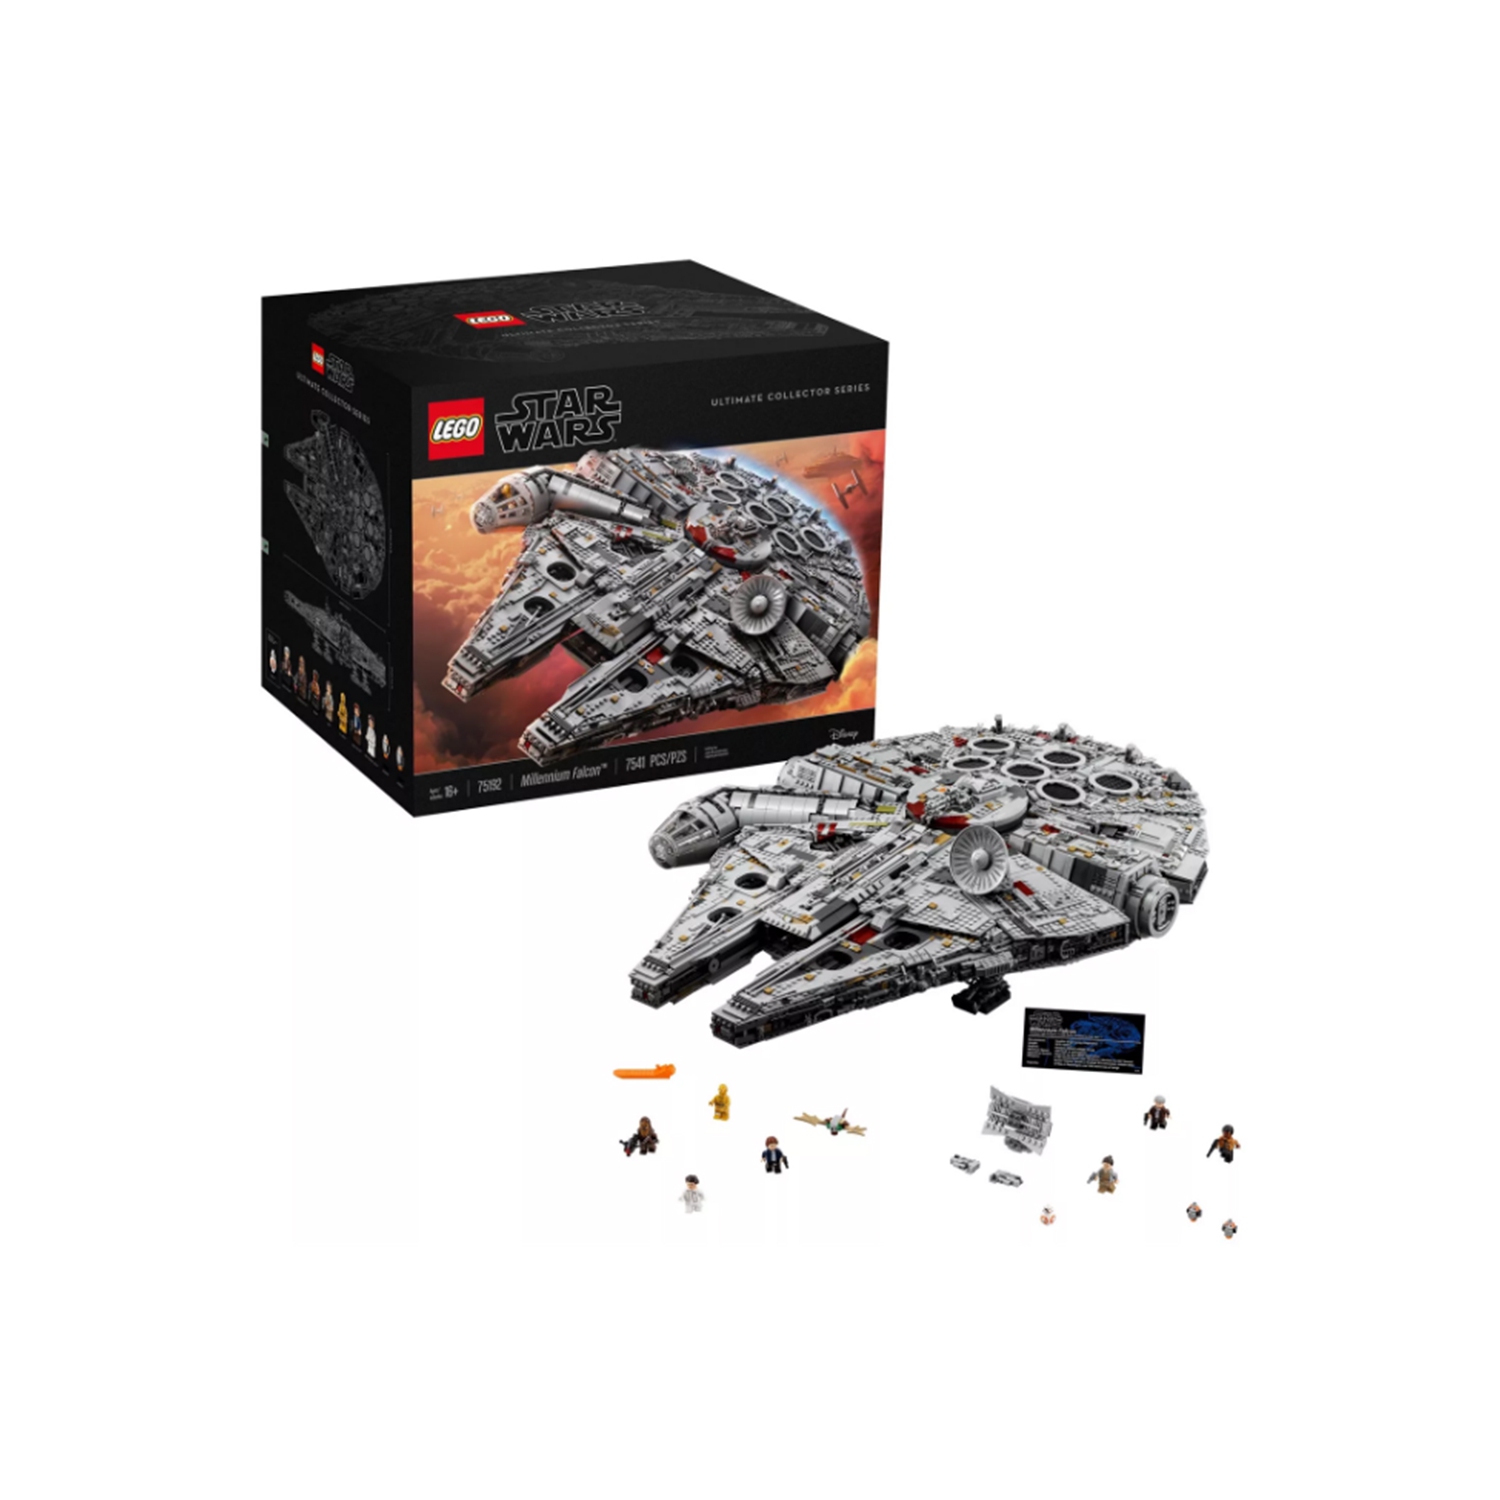 Star Wars Millennium Falcon 75192 by LEGO Ages 16 Years and Up